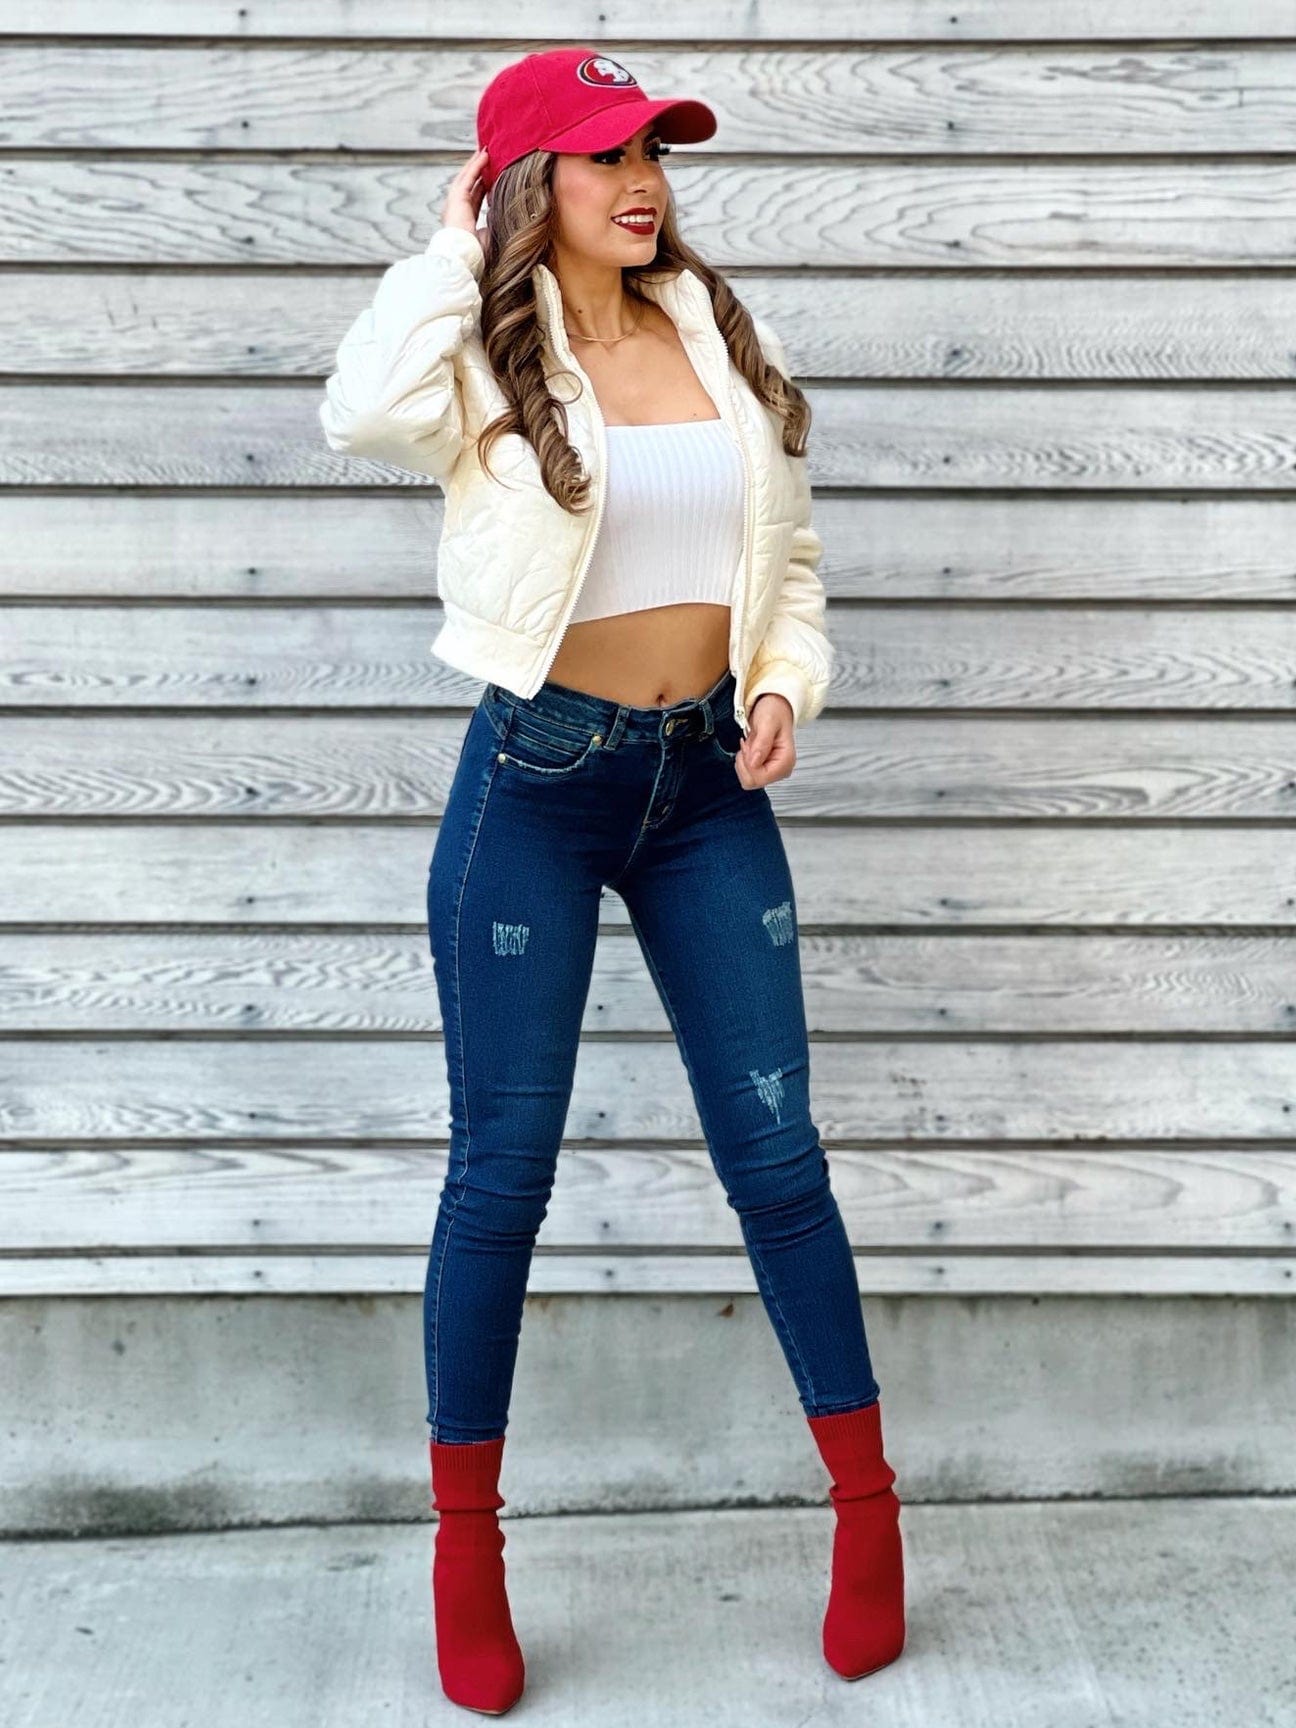 Candy Butt Lift Ripped Skinny Jeans model picture full body front view.